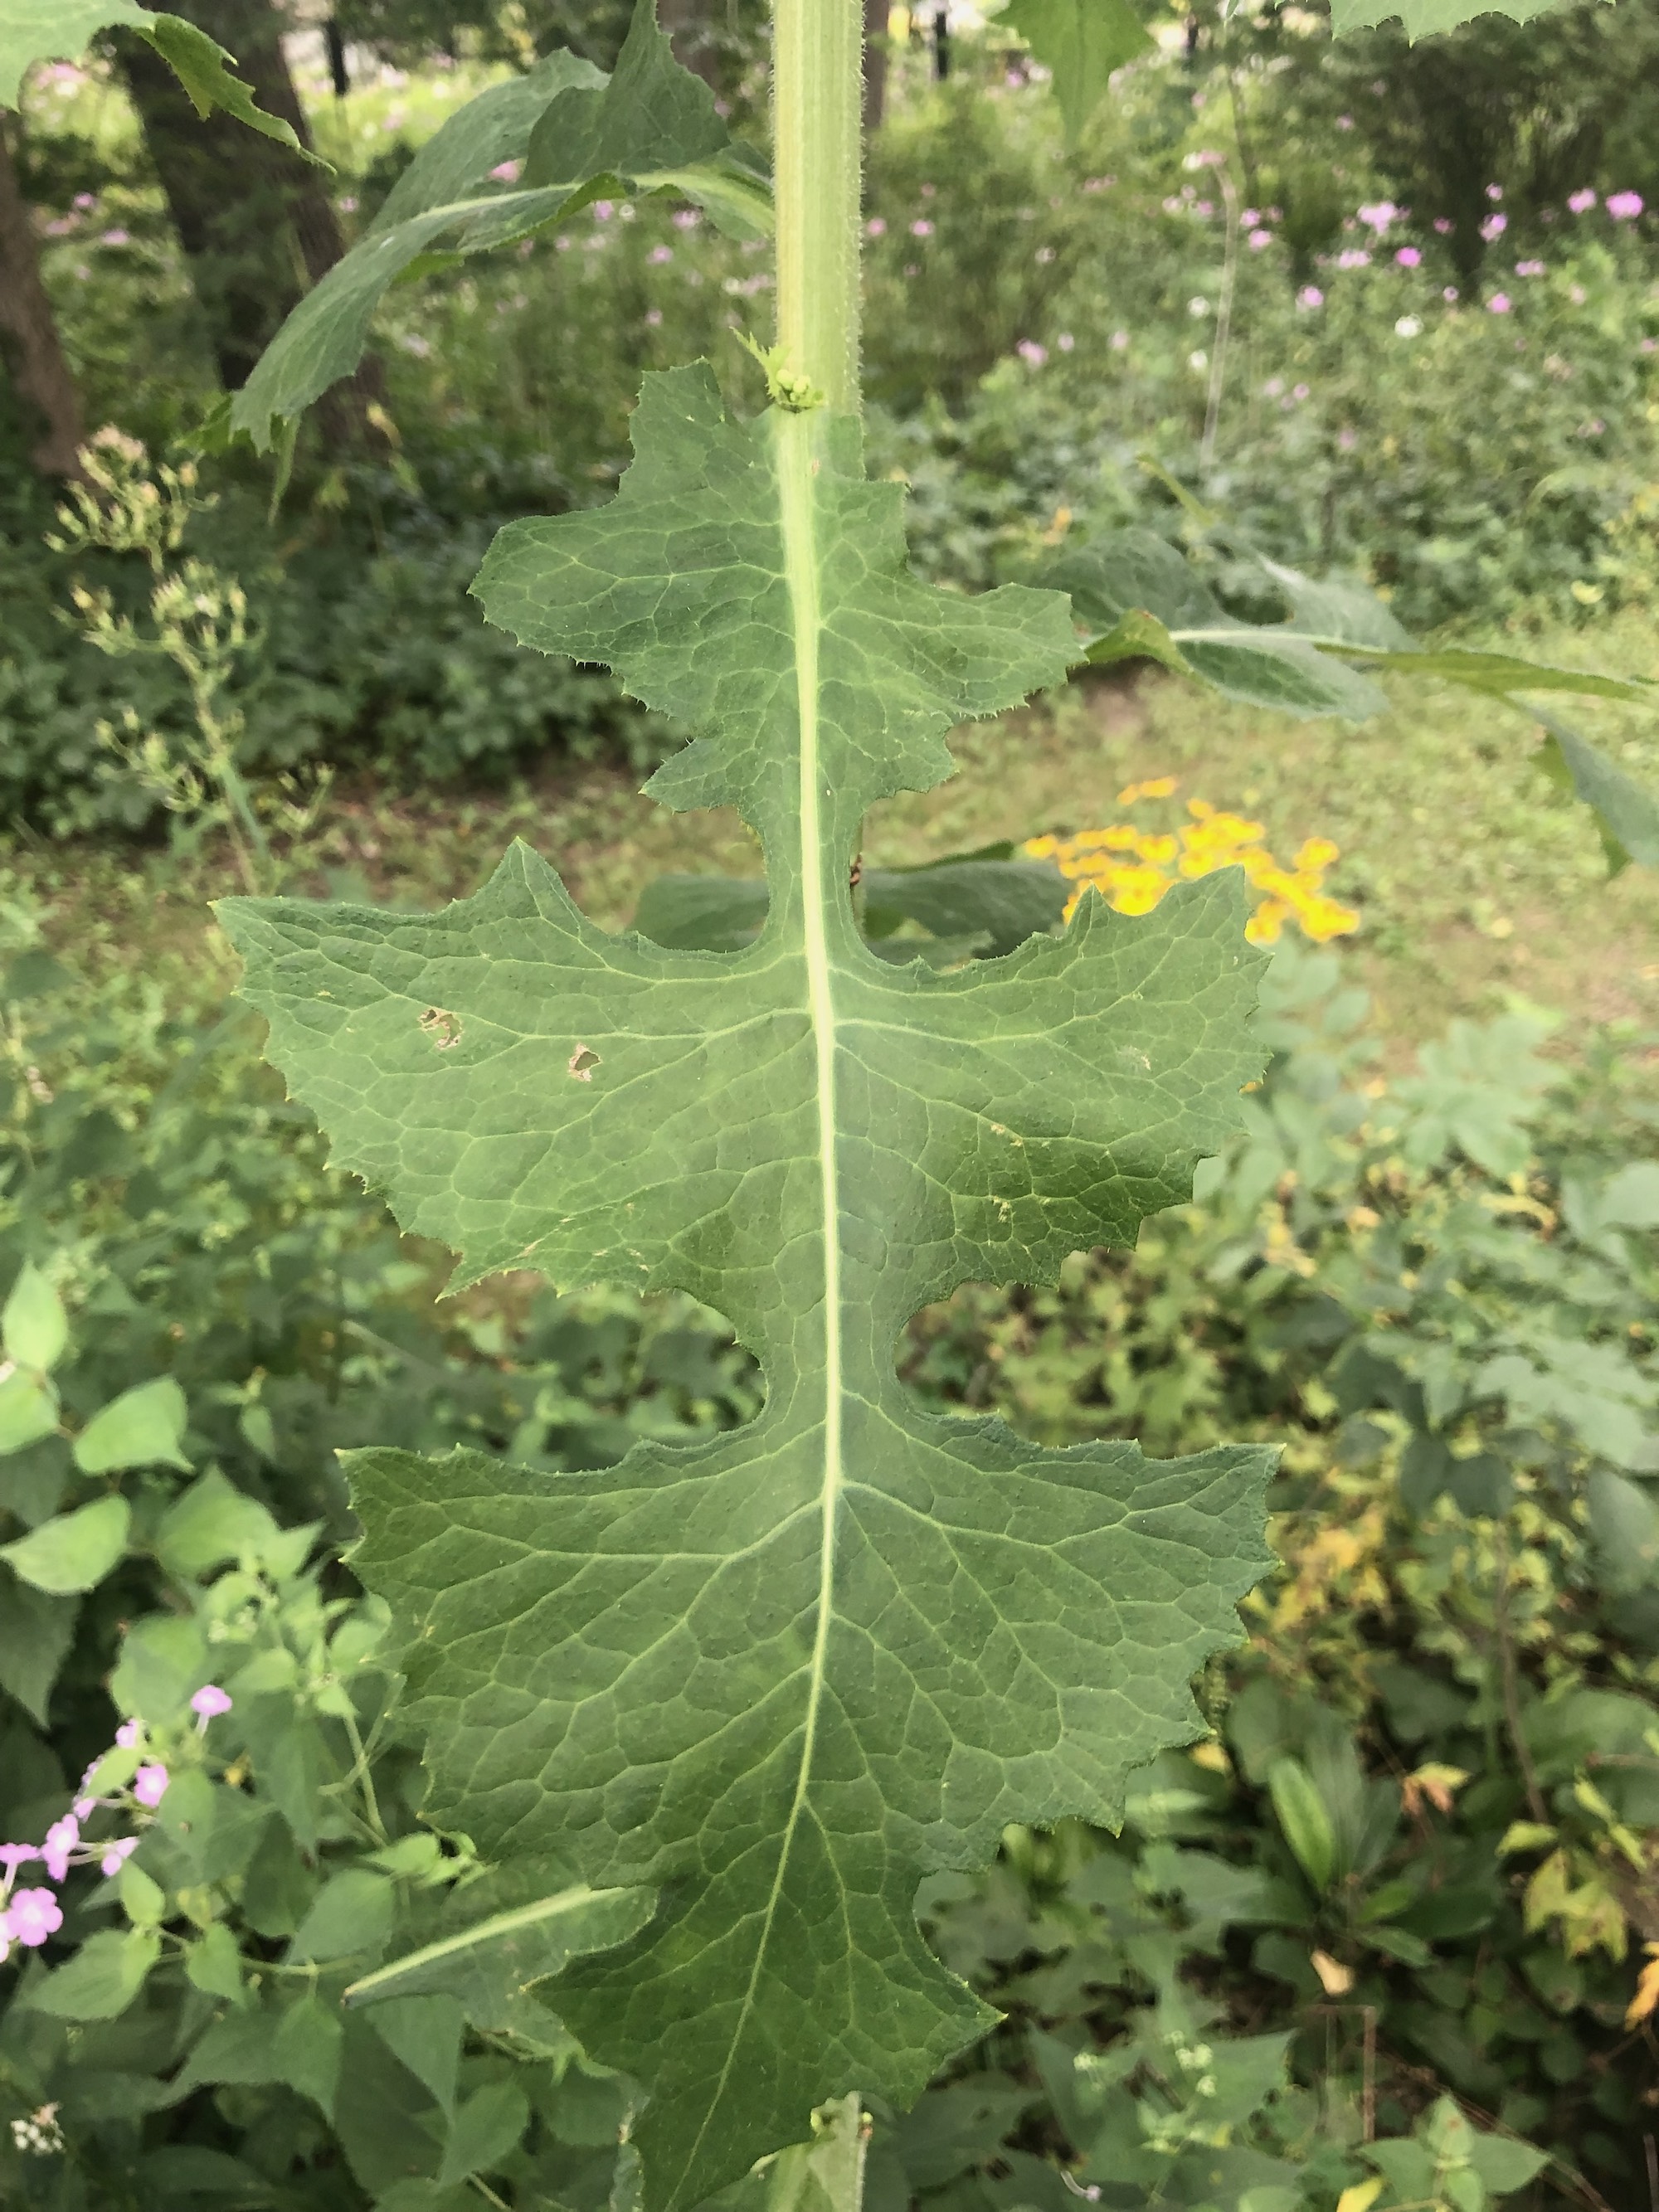 Tall Blue Lettuce leaf at wood's edge between Marion Dunn Prairie and Oak Savanna in Madison, Wisconsin on August 16, 2021.